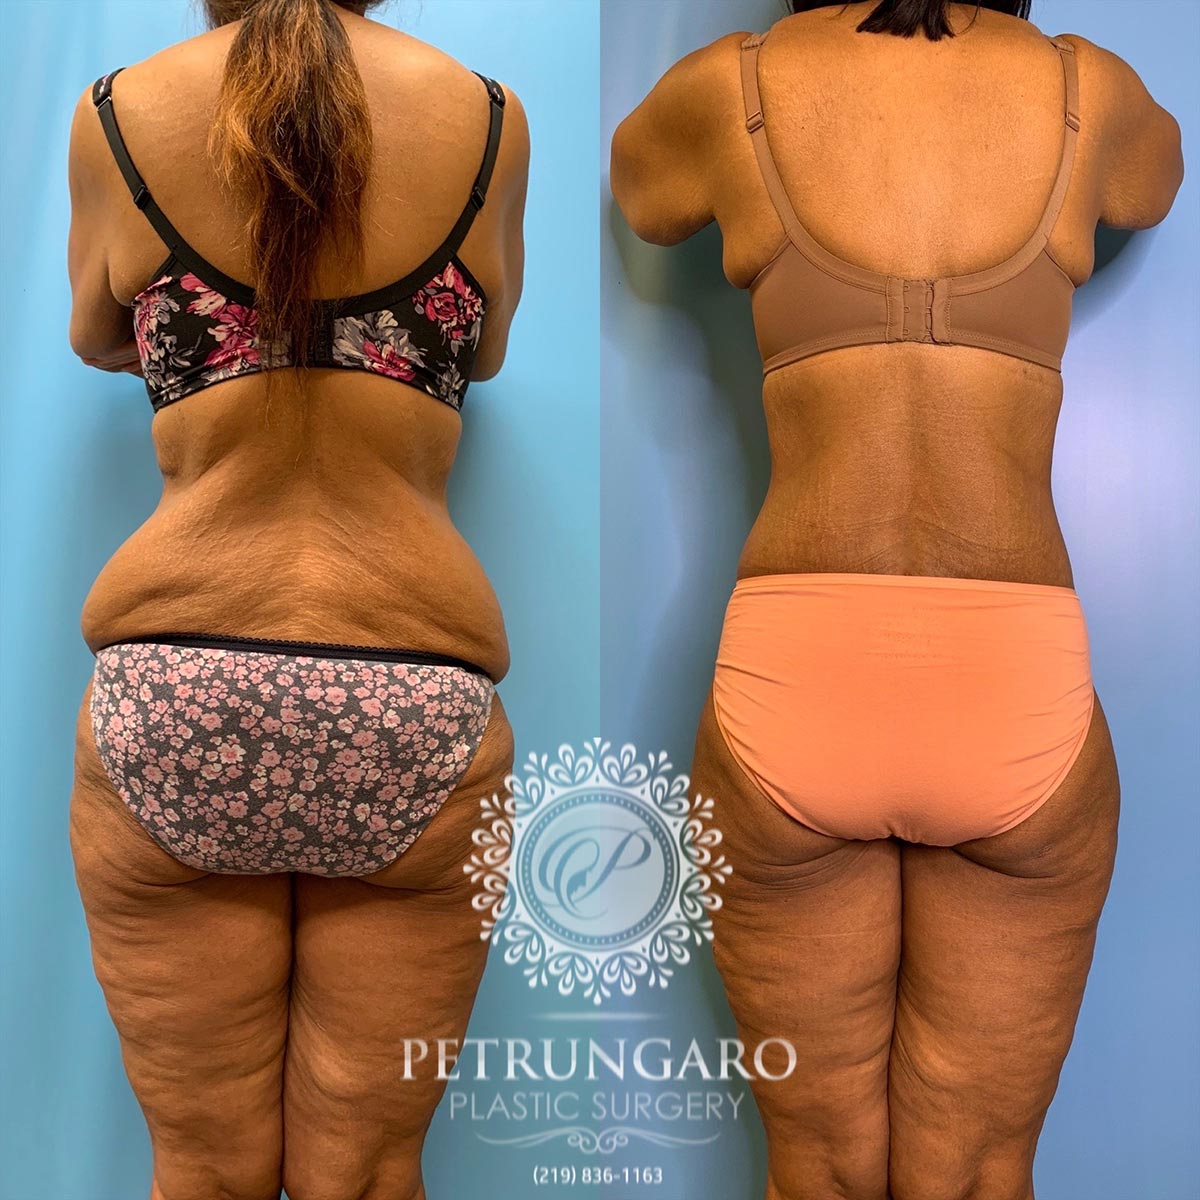 42 year old woman 3 months after a circumferential body lift-6